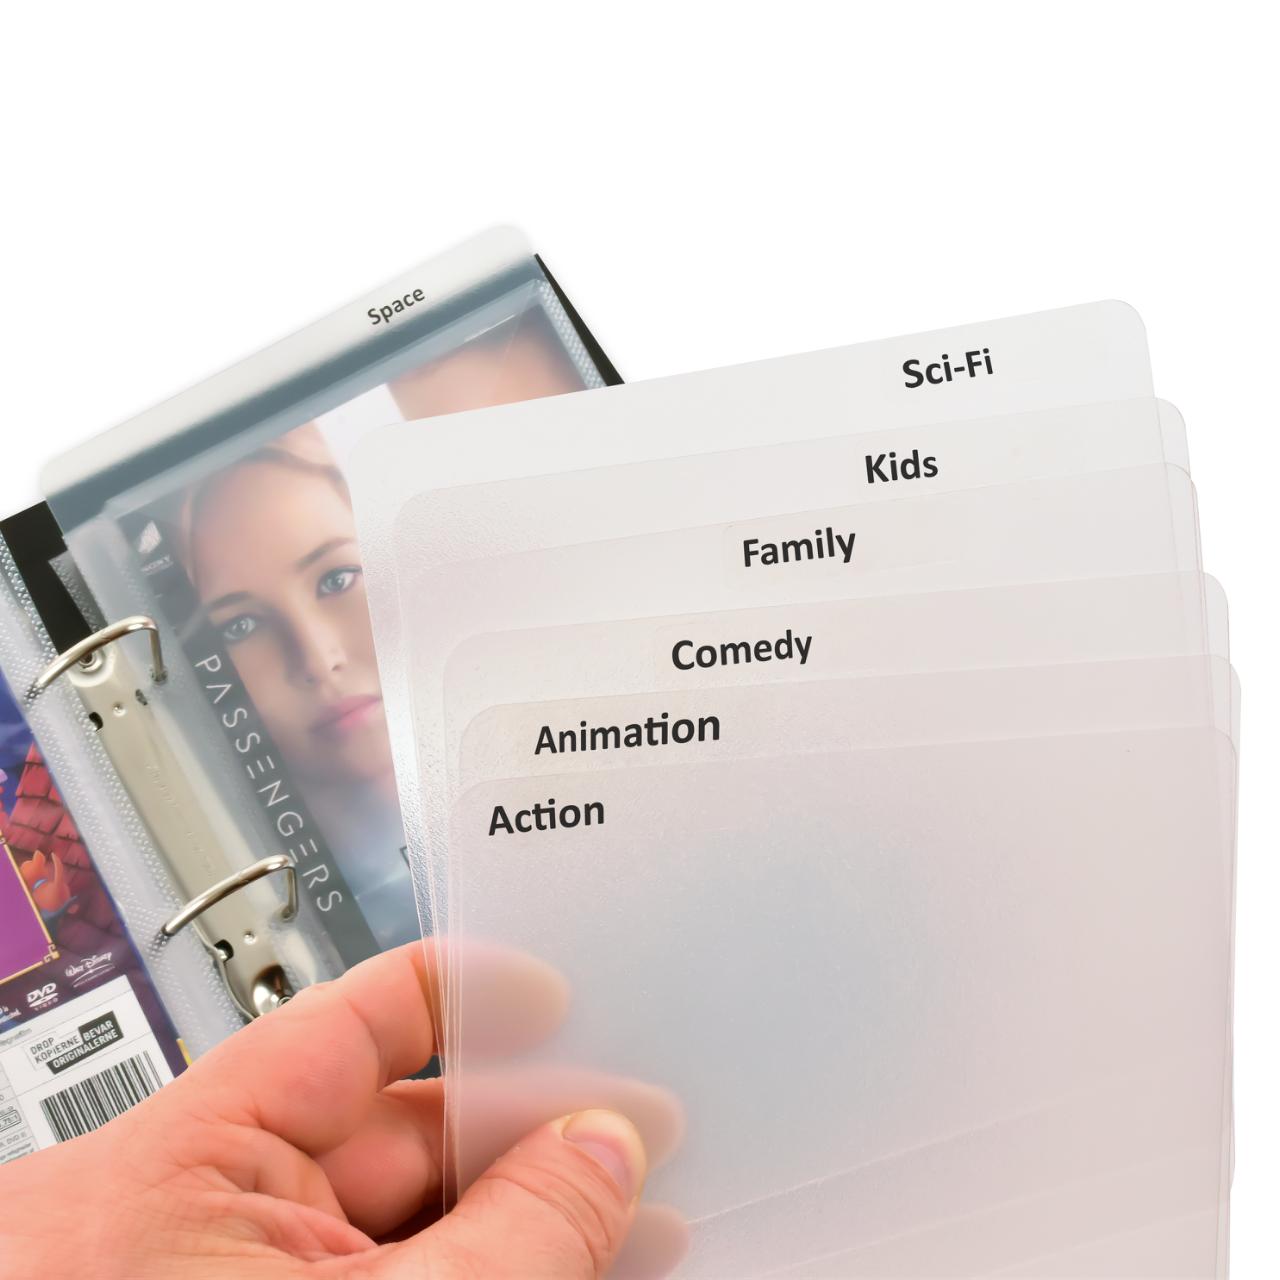 DVD Dividers with binder holes and labels with pre-printed film genres